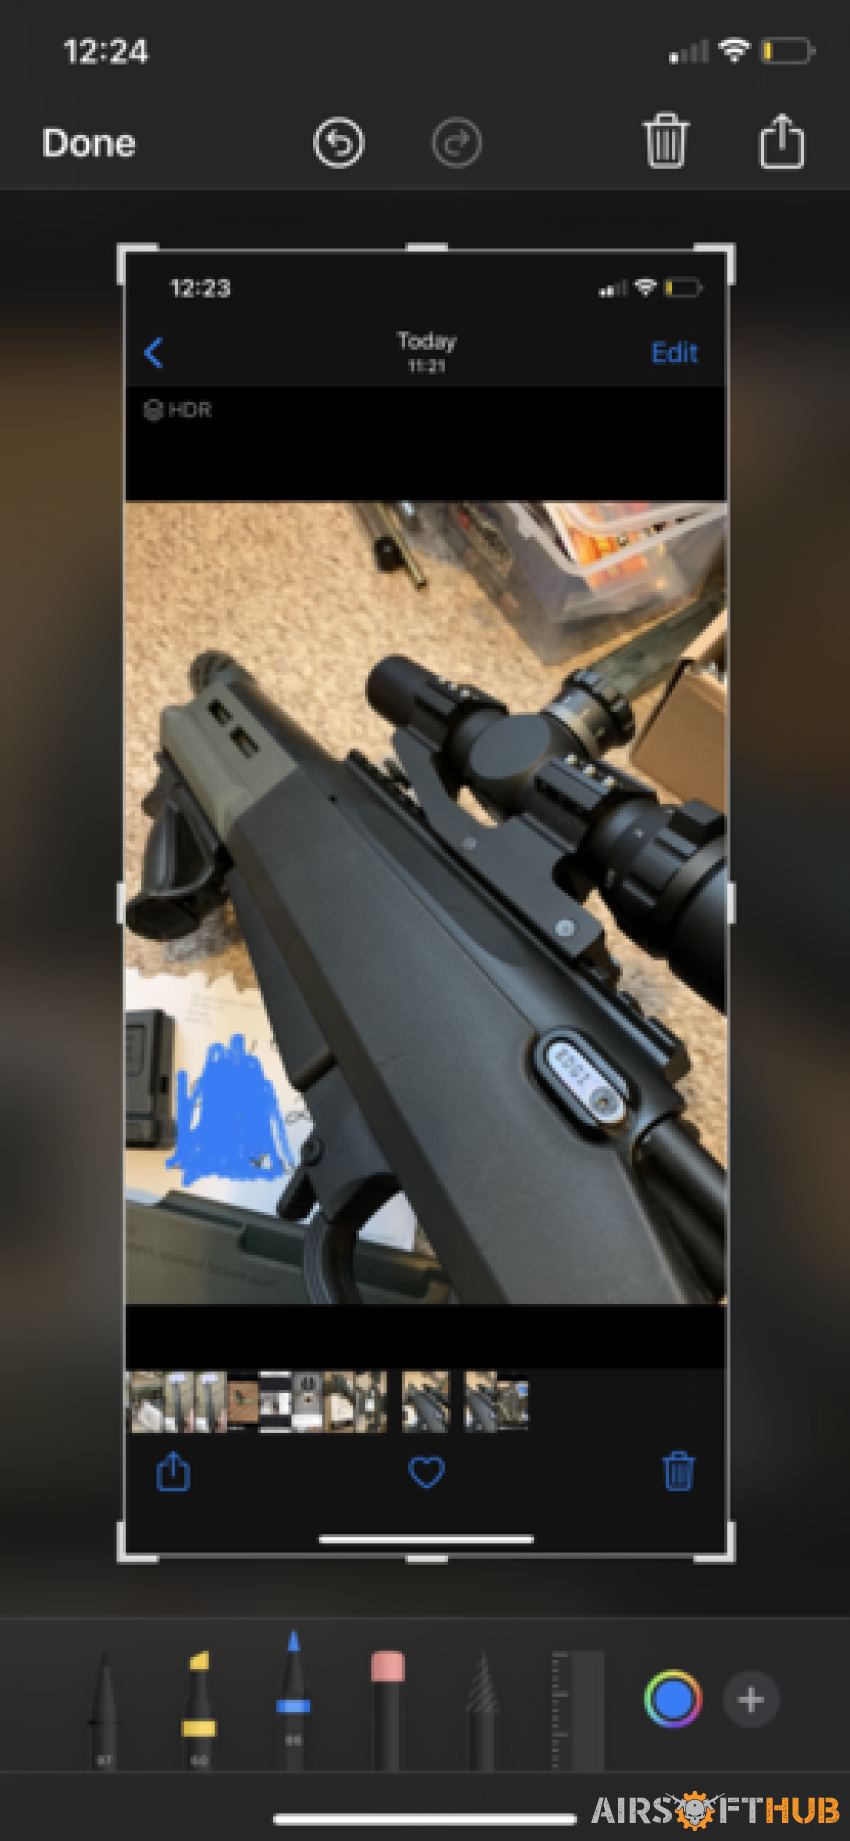 Upgraded sniper - Used airsoft equipment